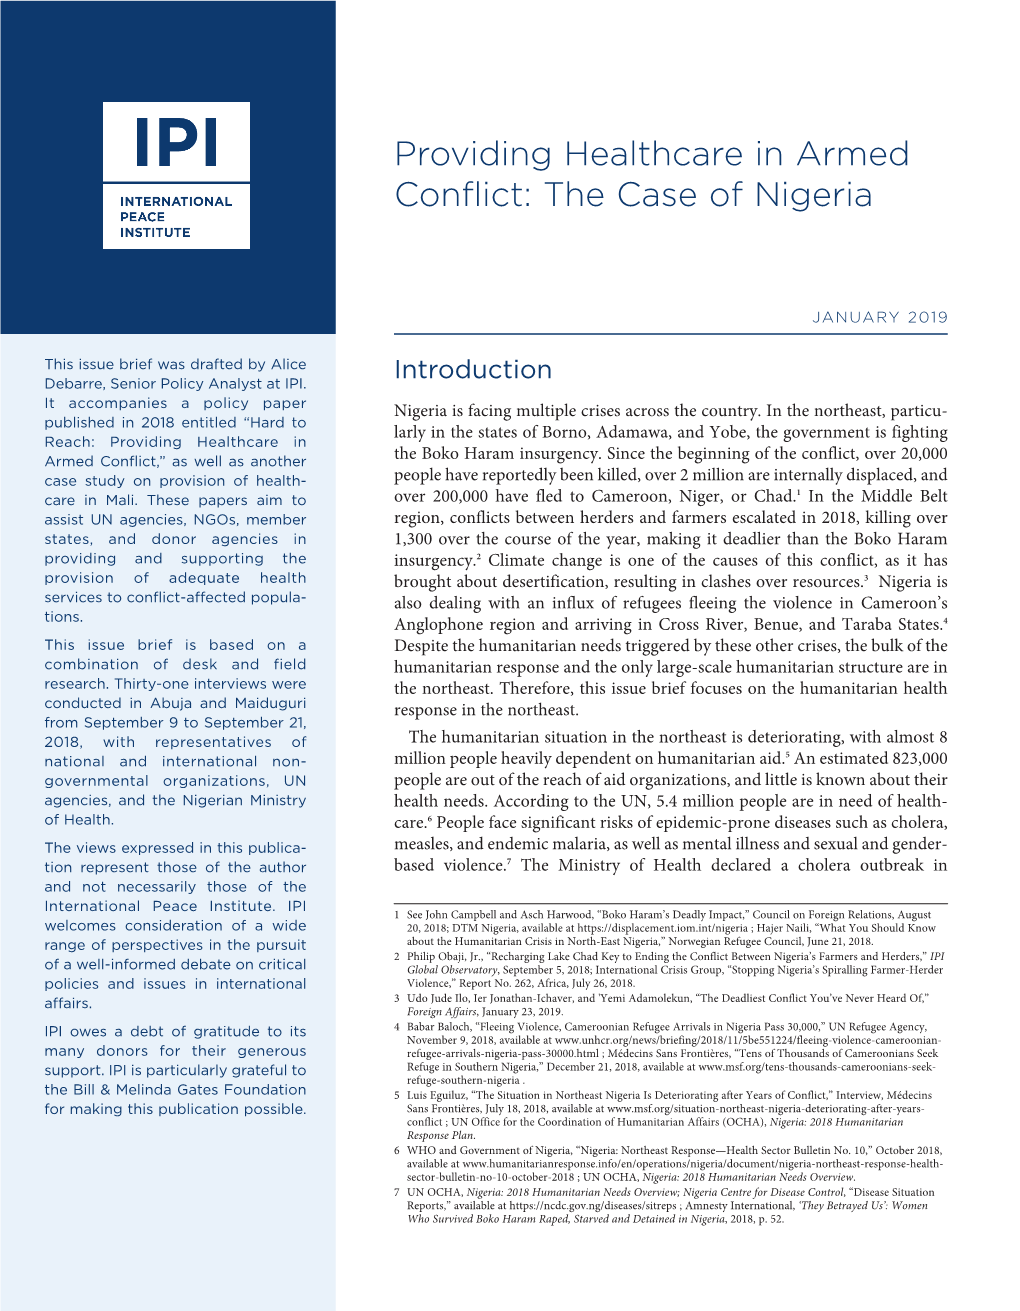 Providing Healthcare in Armed Conflict: the Case of Nigeria